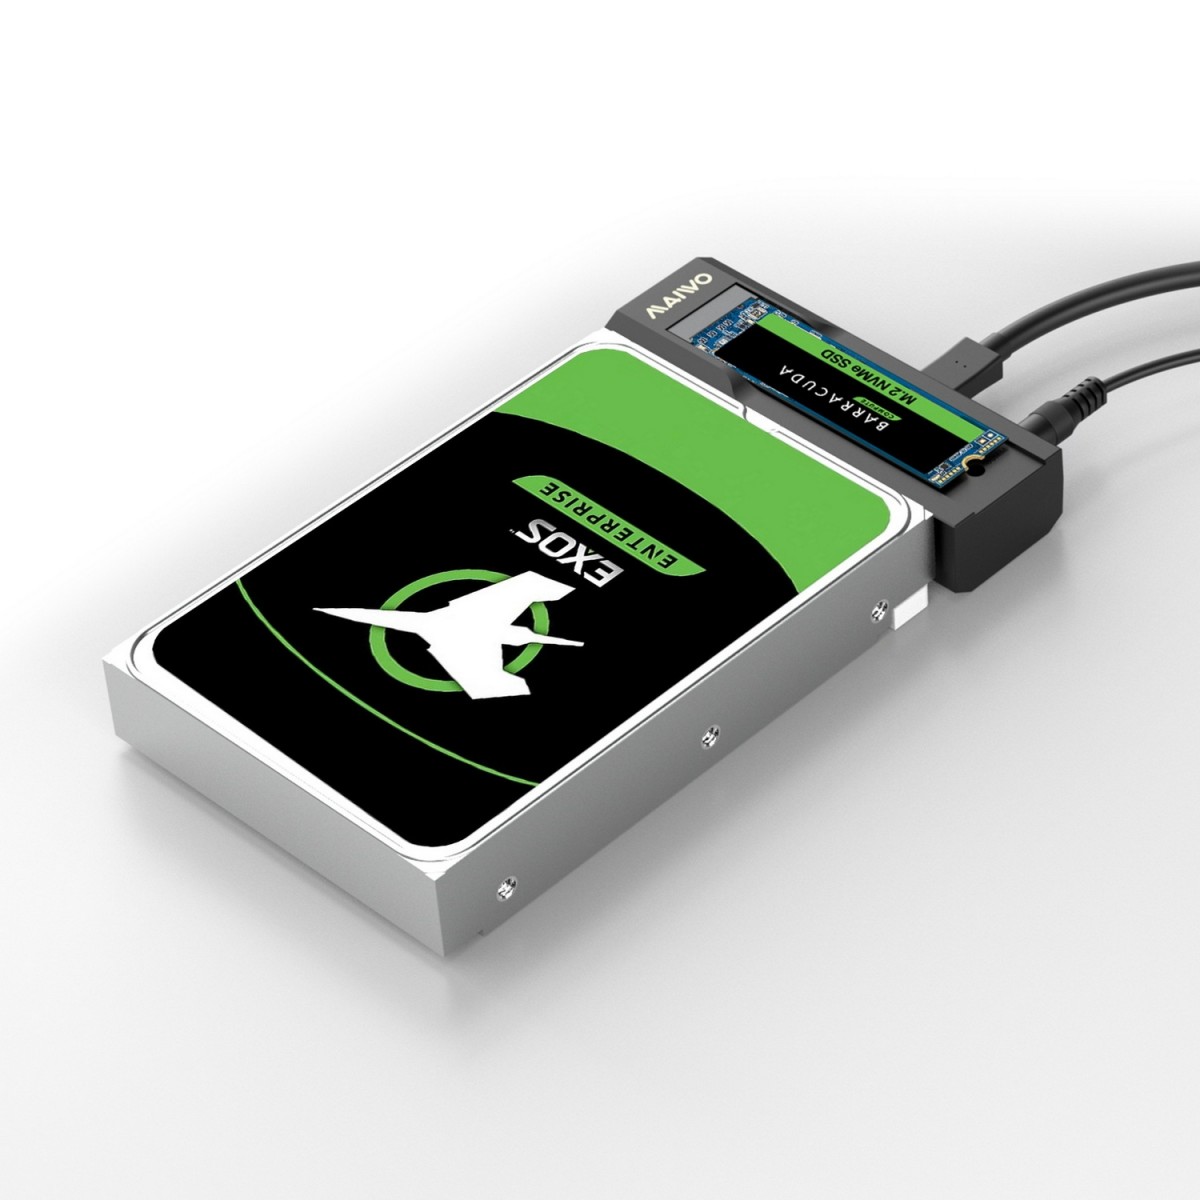 A large marketing image providing additional information about the product Simplecom SA536 USB to M.2 and SATA 2-in-1 Adapter - Additional alt info not provided